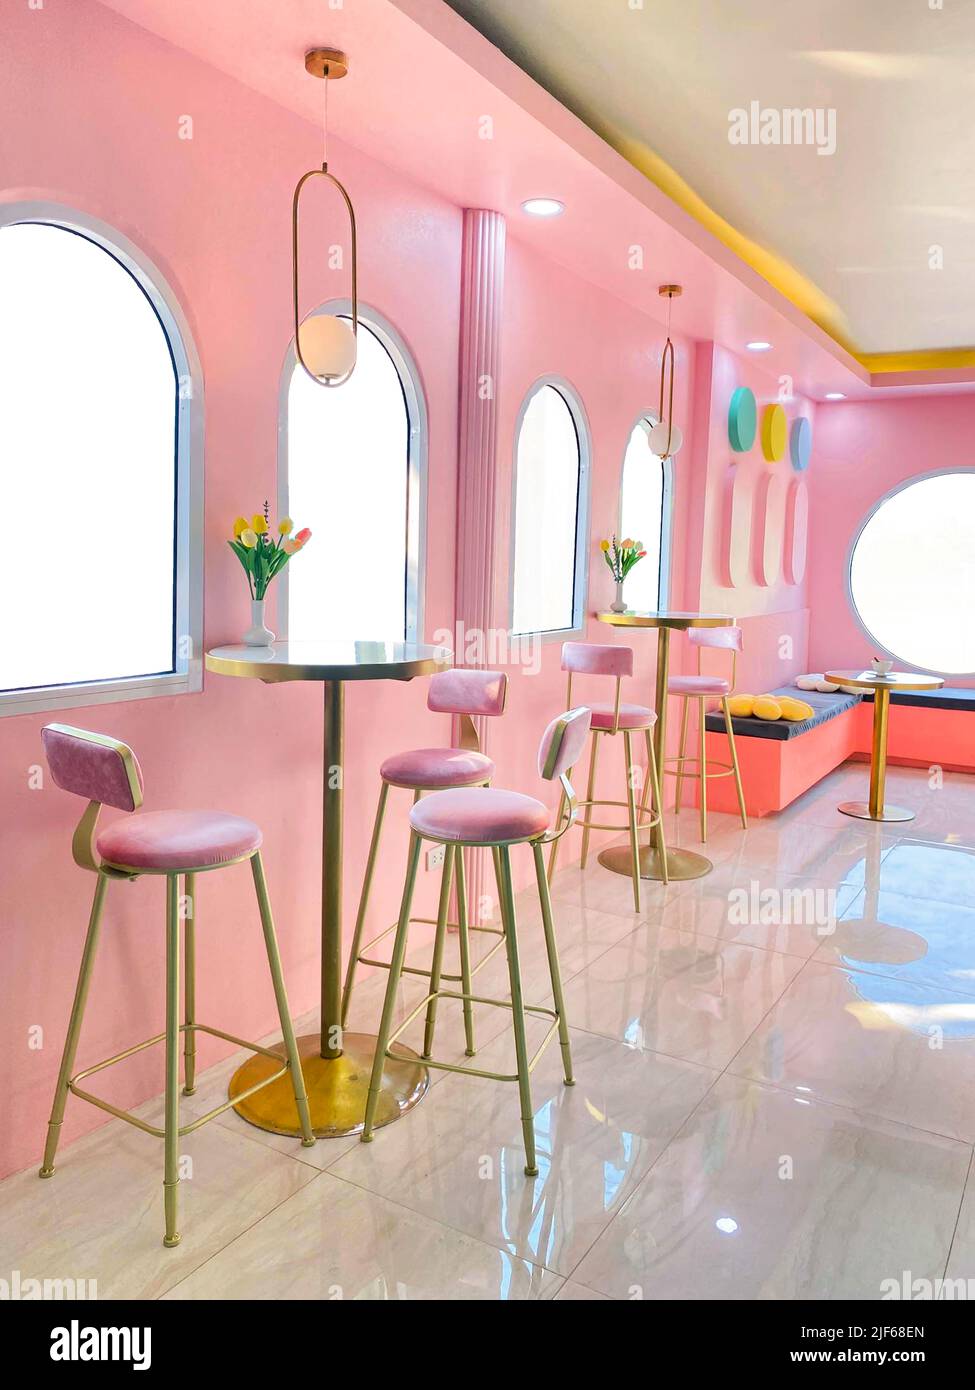 Bright and pink interiordesign for a coffee shop, bakery, cafe, co-working space Stock Photo